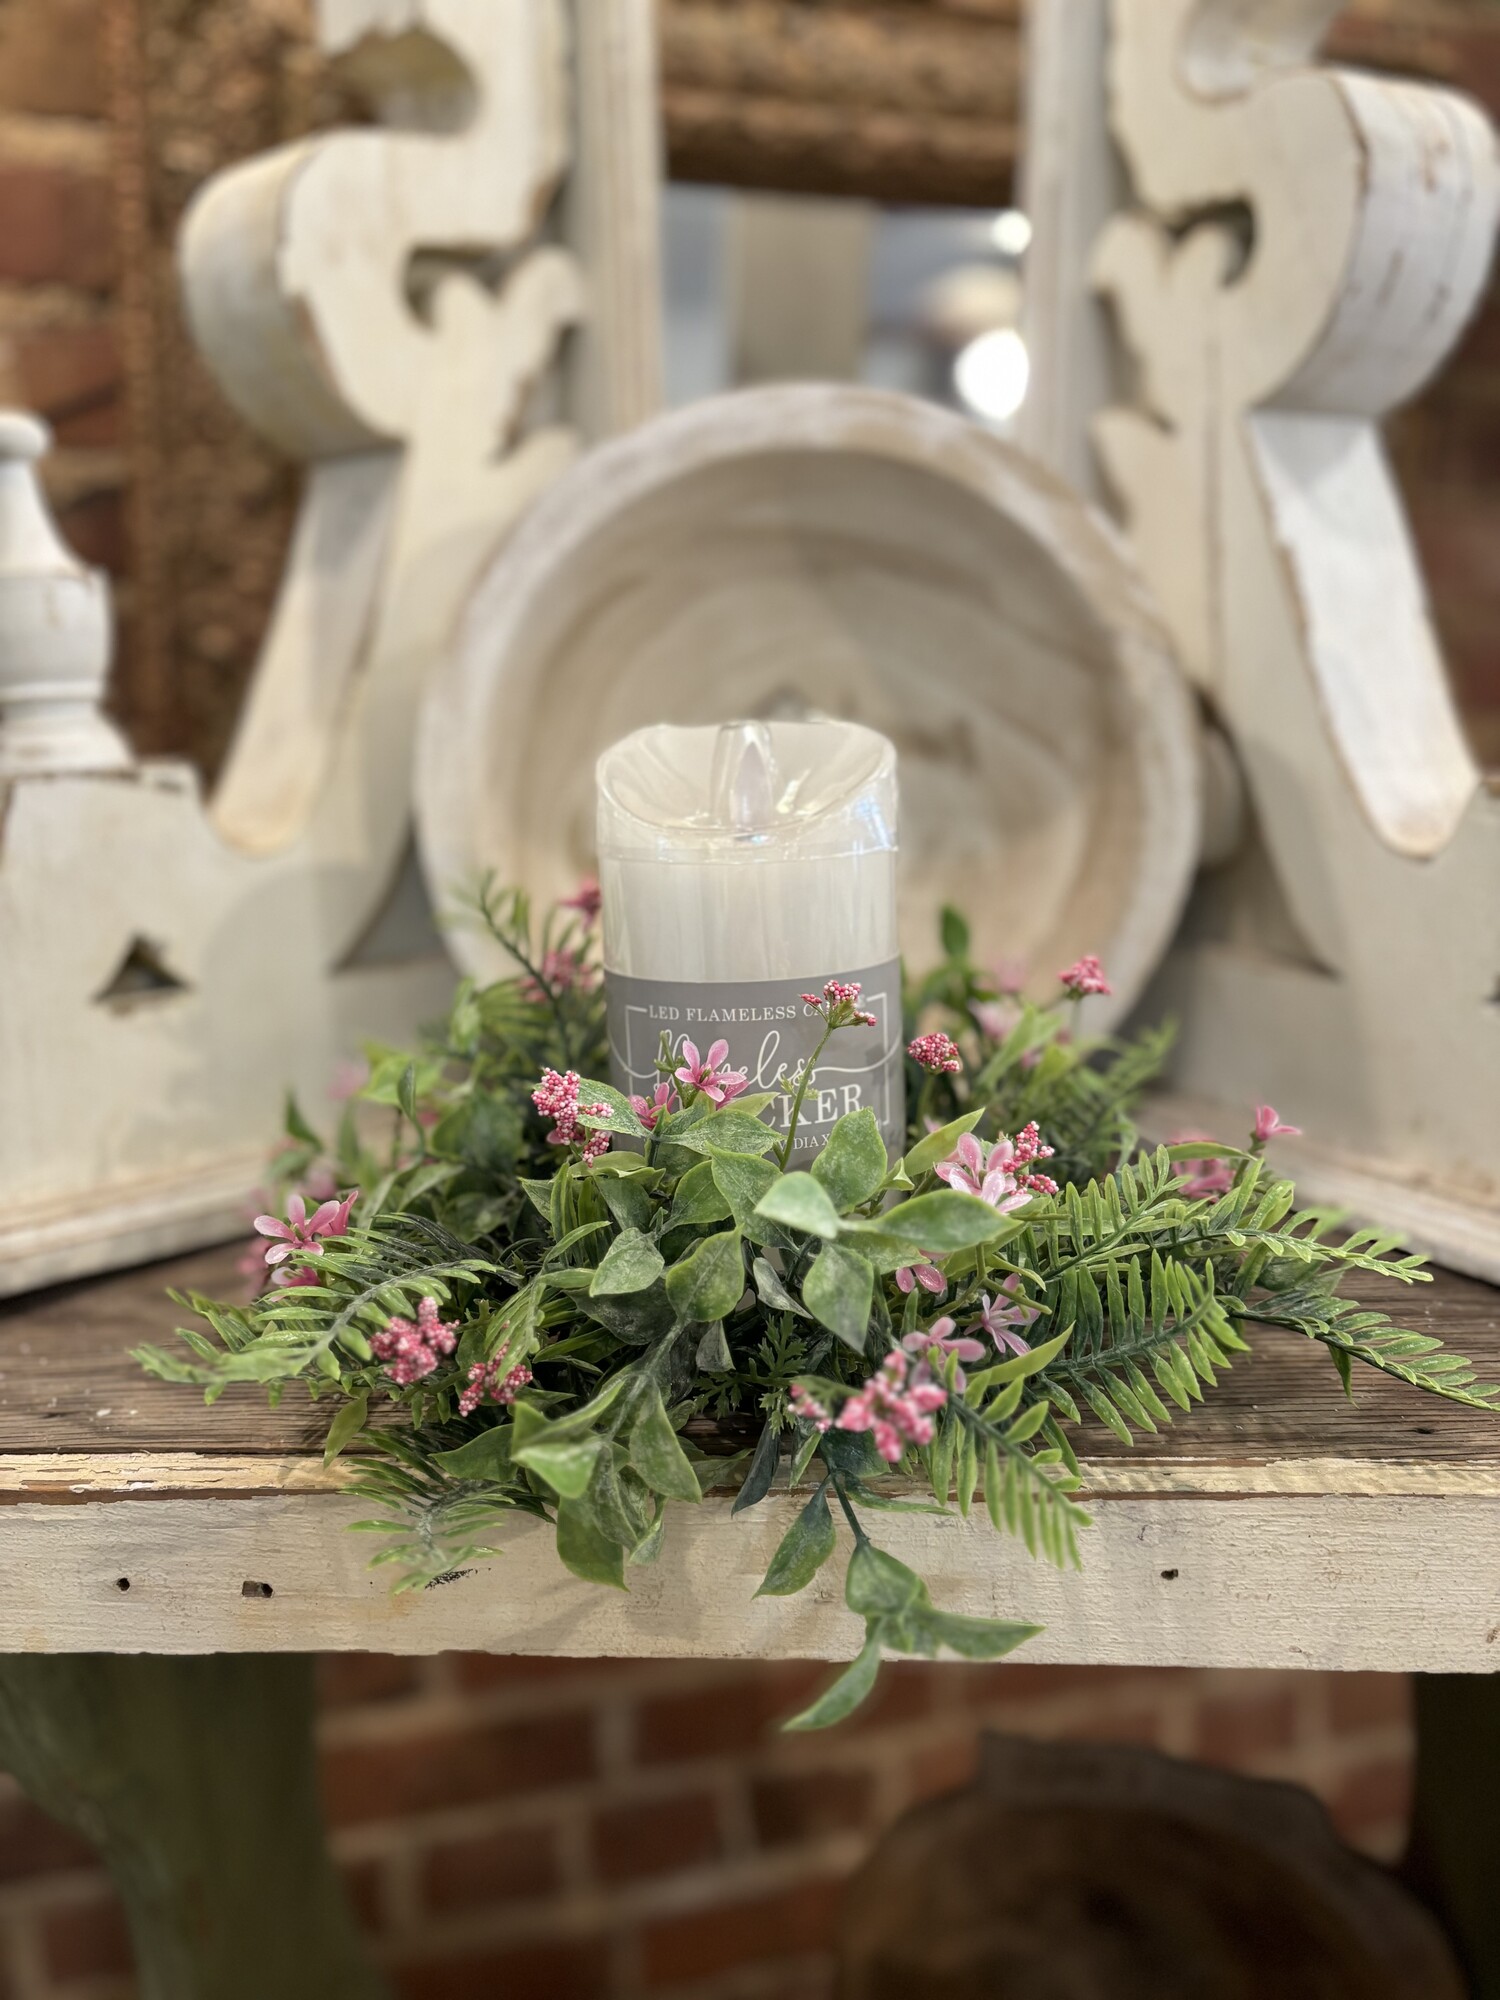 The Pink Fernshot Candle Ring is a beautiful candle ring that will add a nice touch of spring or summer to your home
Ring measures 10 inches in diameter and 3 inches inner  ring